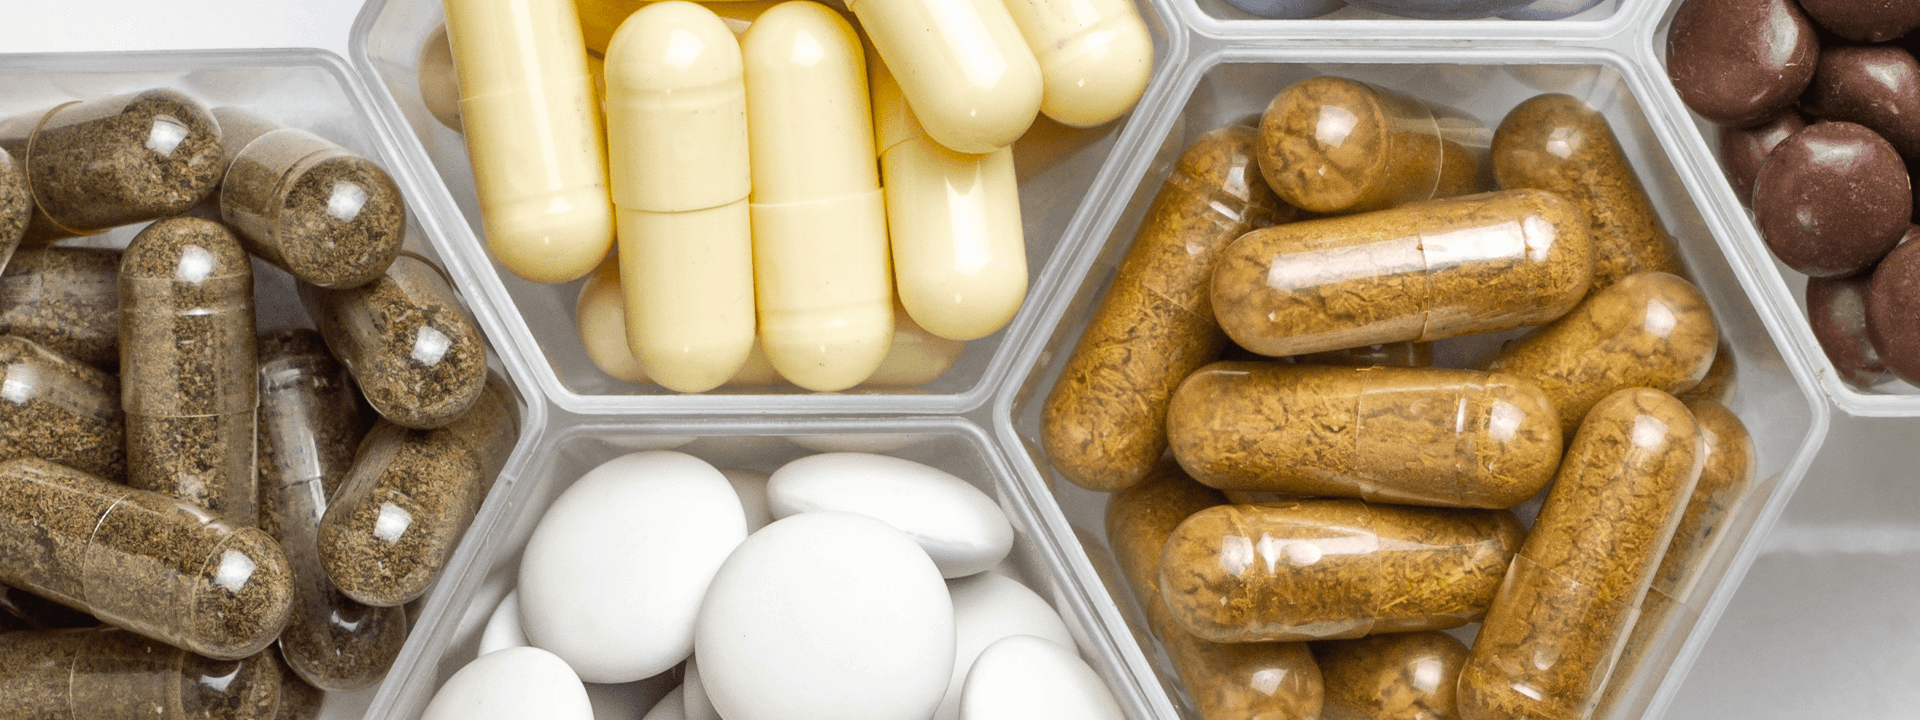 How Important Is It To Take Supplements At The Recommended Dosage?